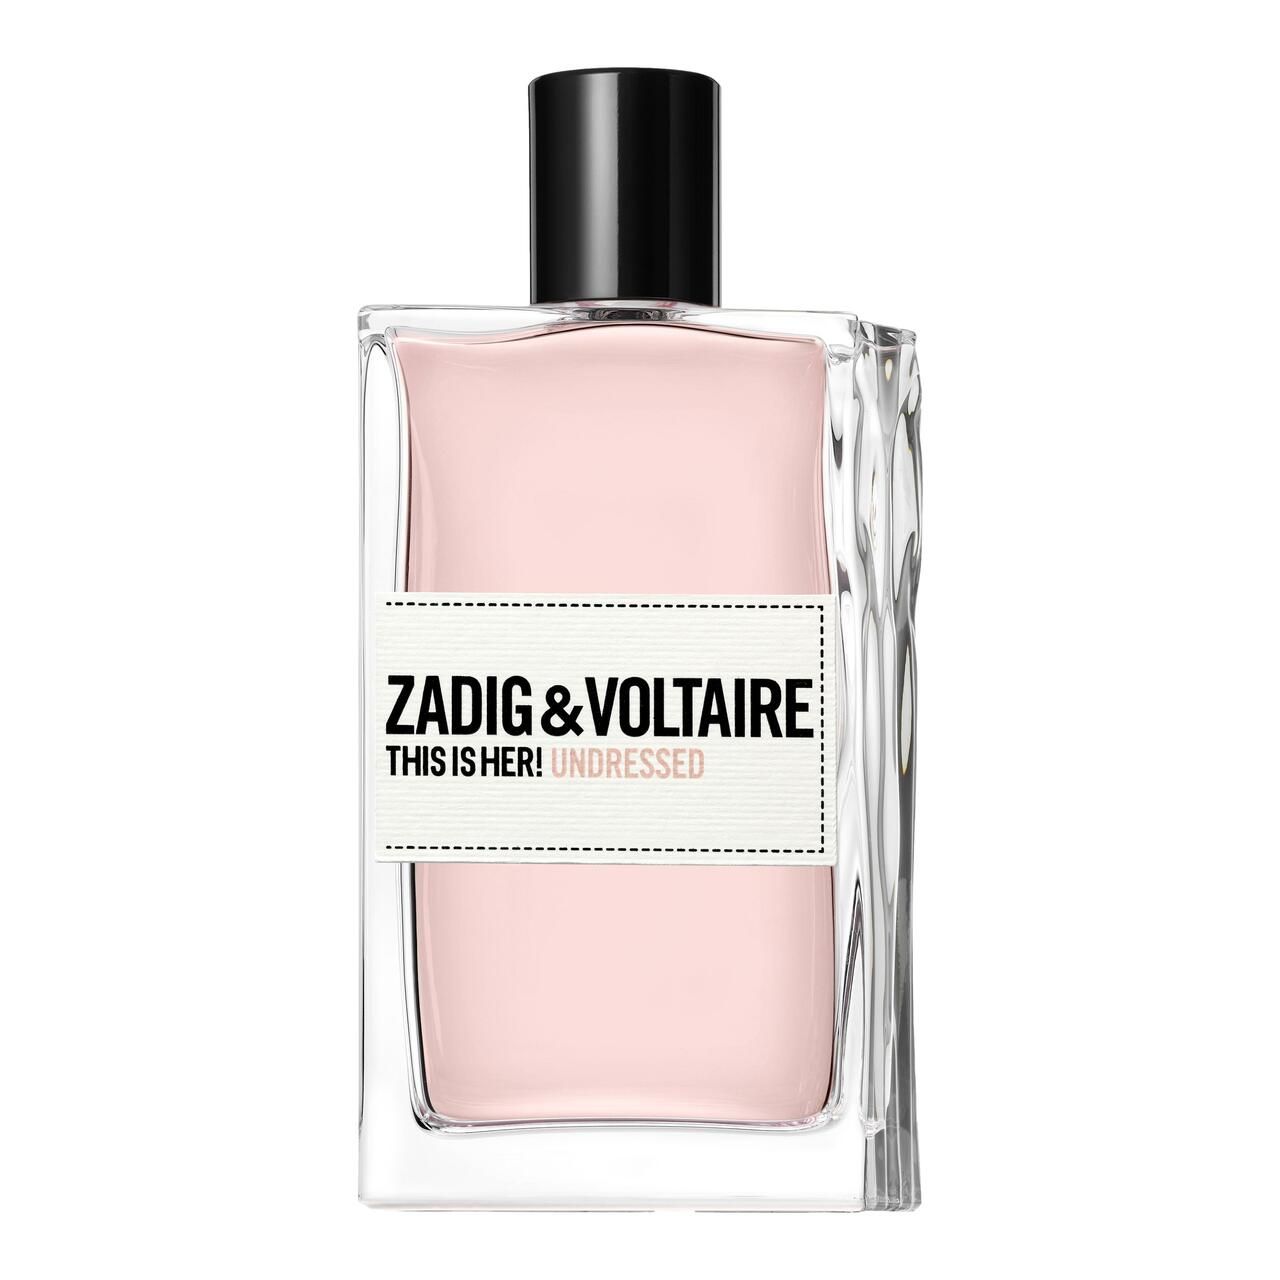 Zadig & Voltaire, This is Her! Undressed E.d.P. Nat. Spray